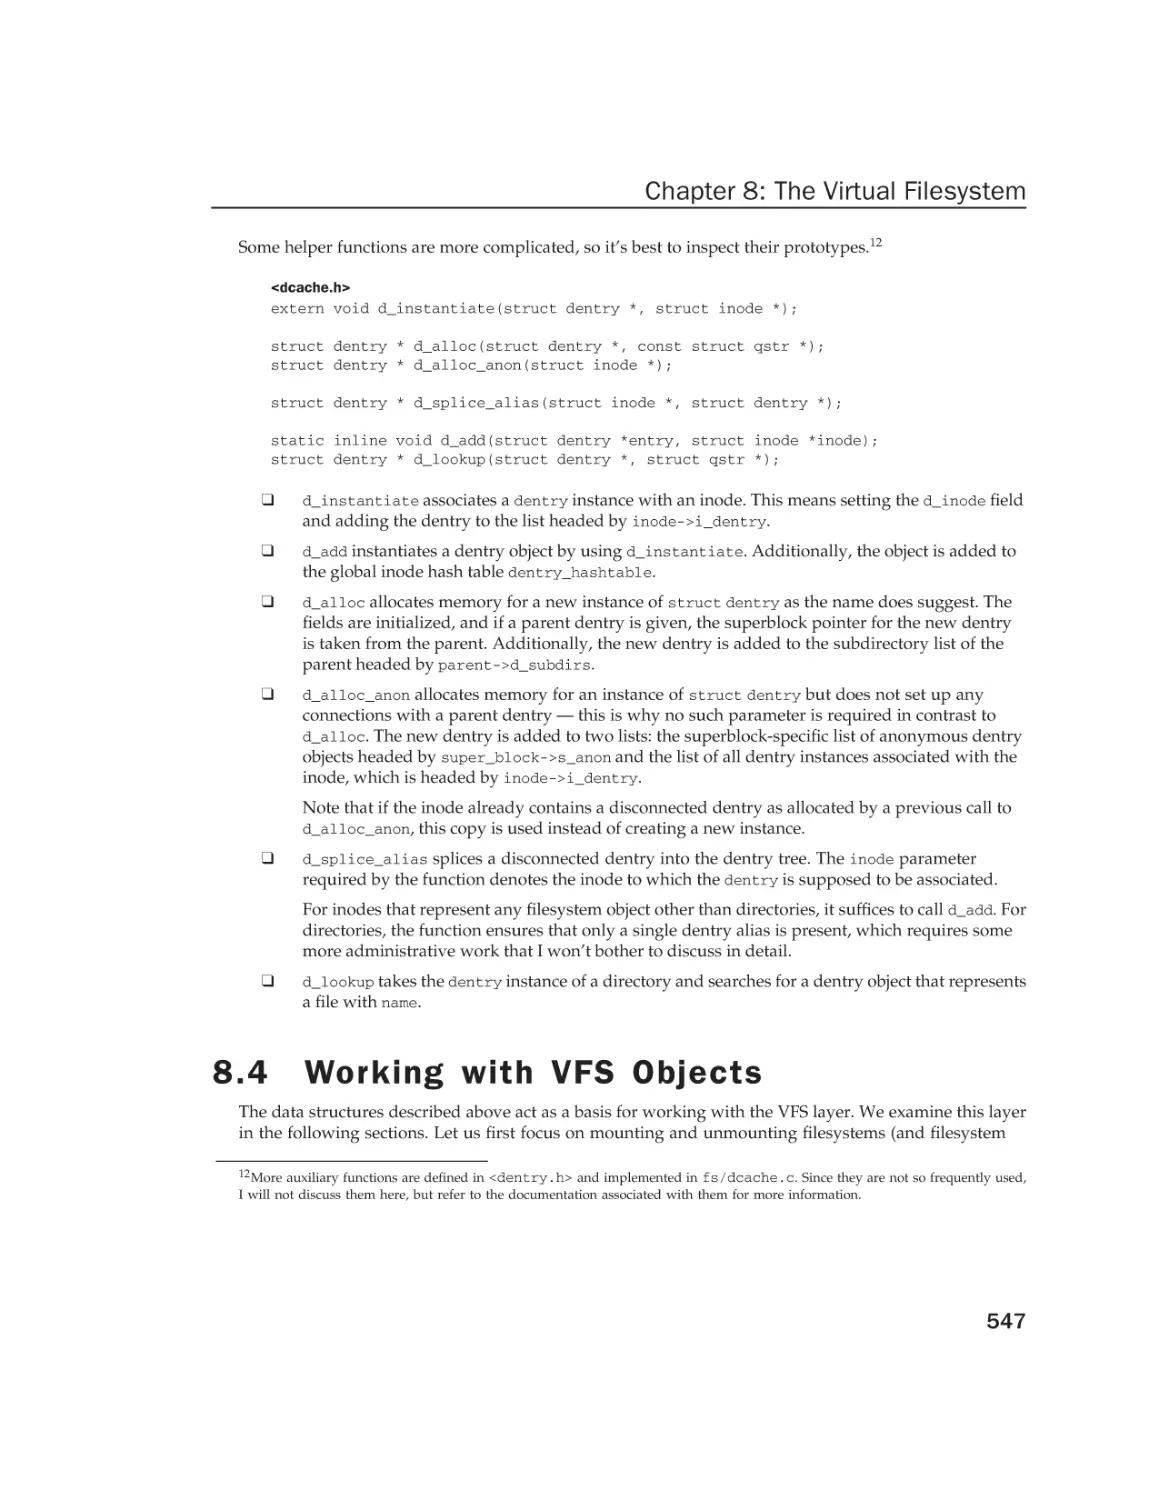 8.4 Working with VFS Objects